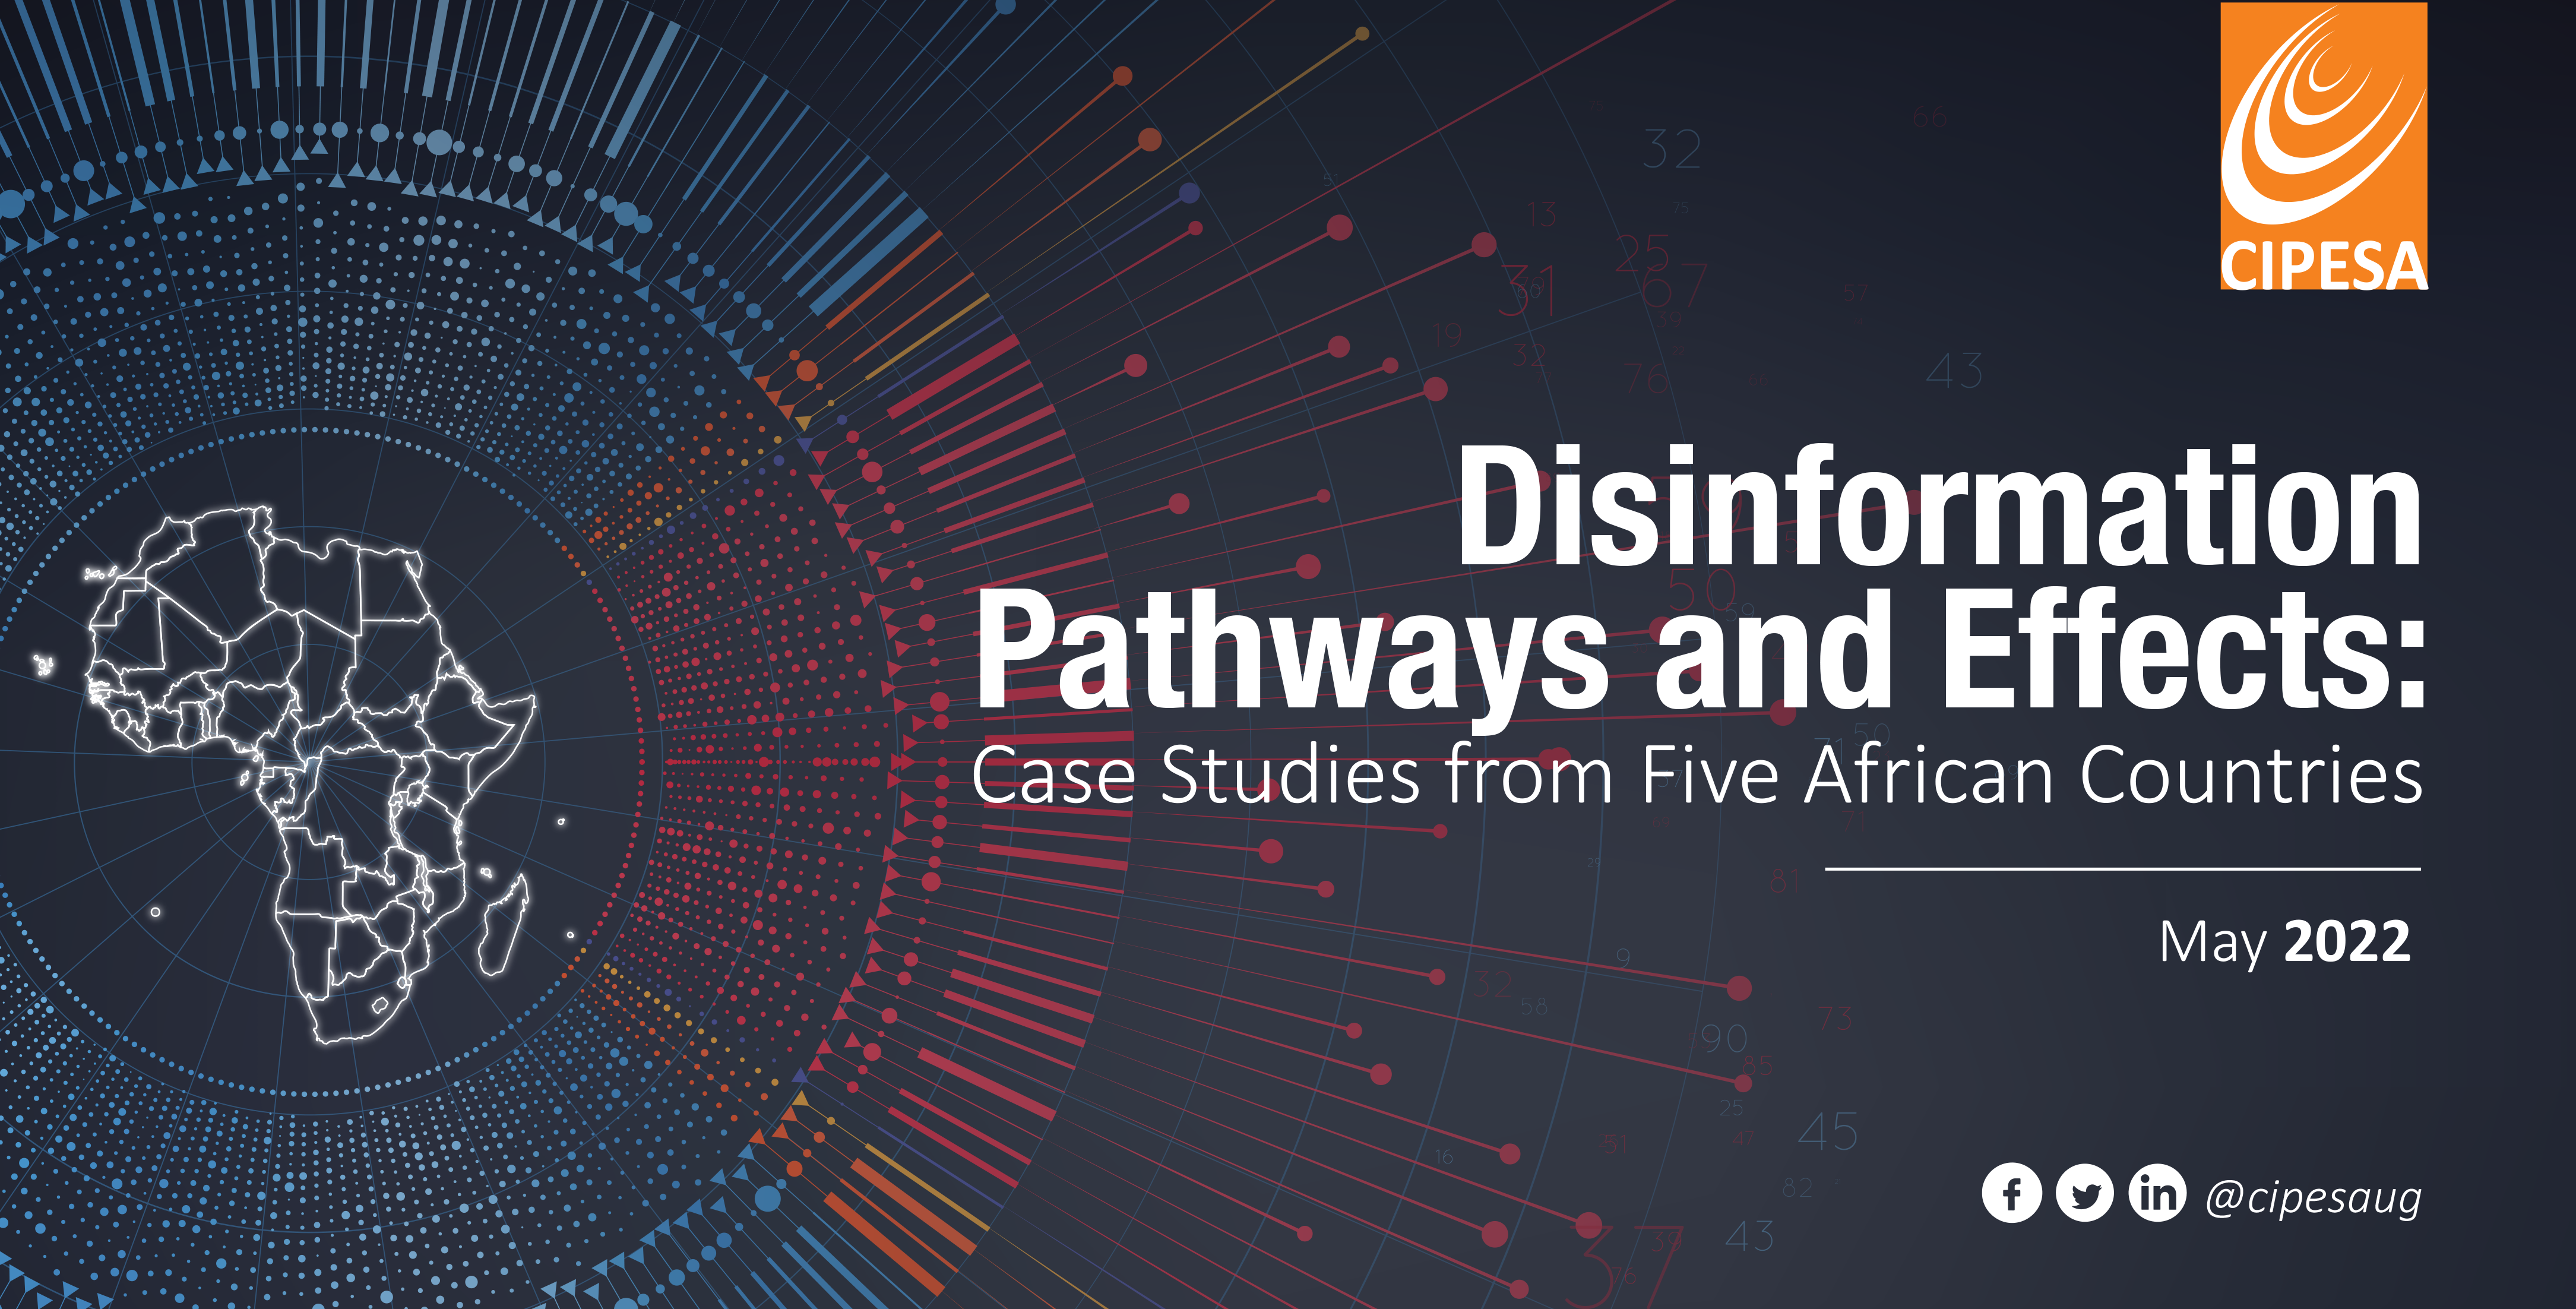 New Report: Disinformation Pathways and Effects on Democracy and Human Rights in Africa